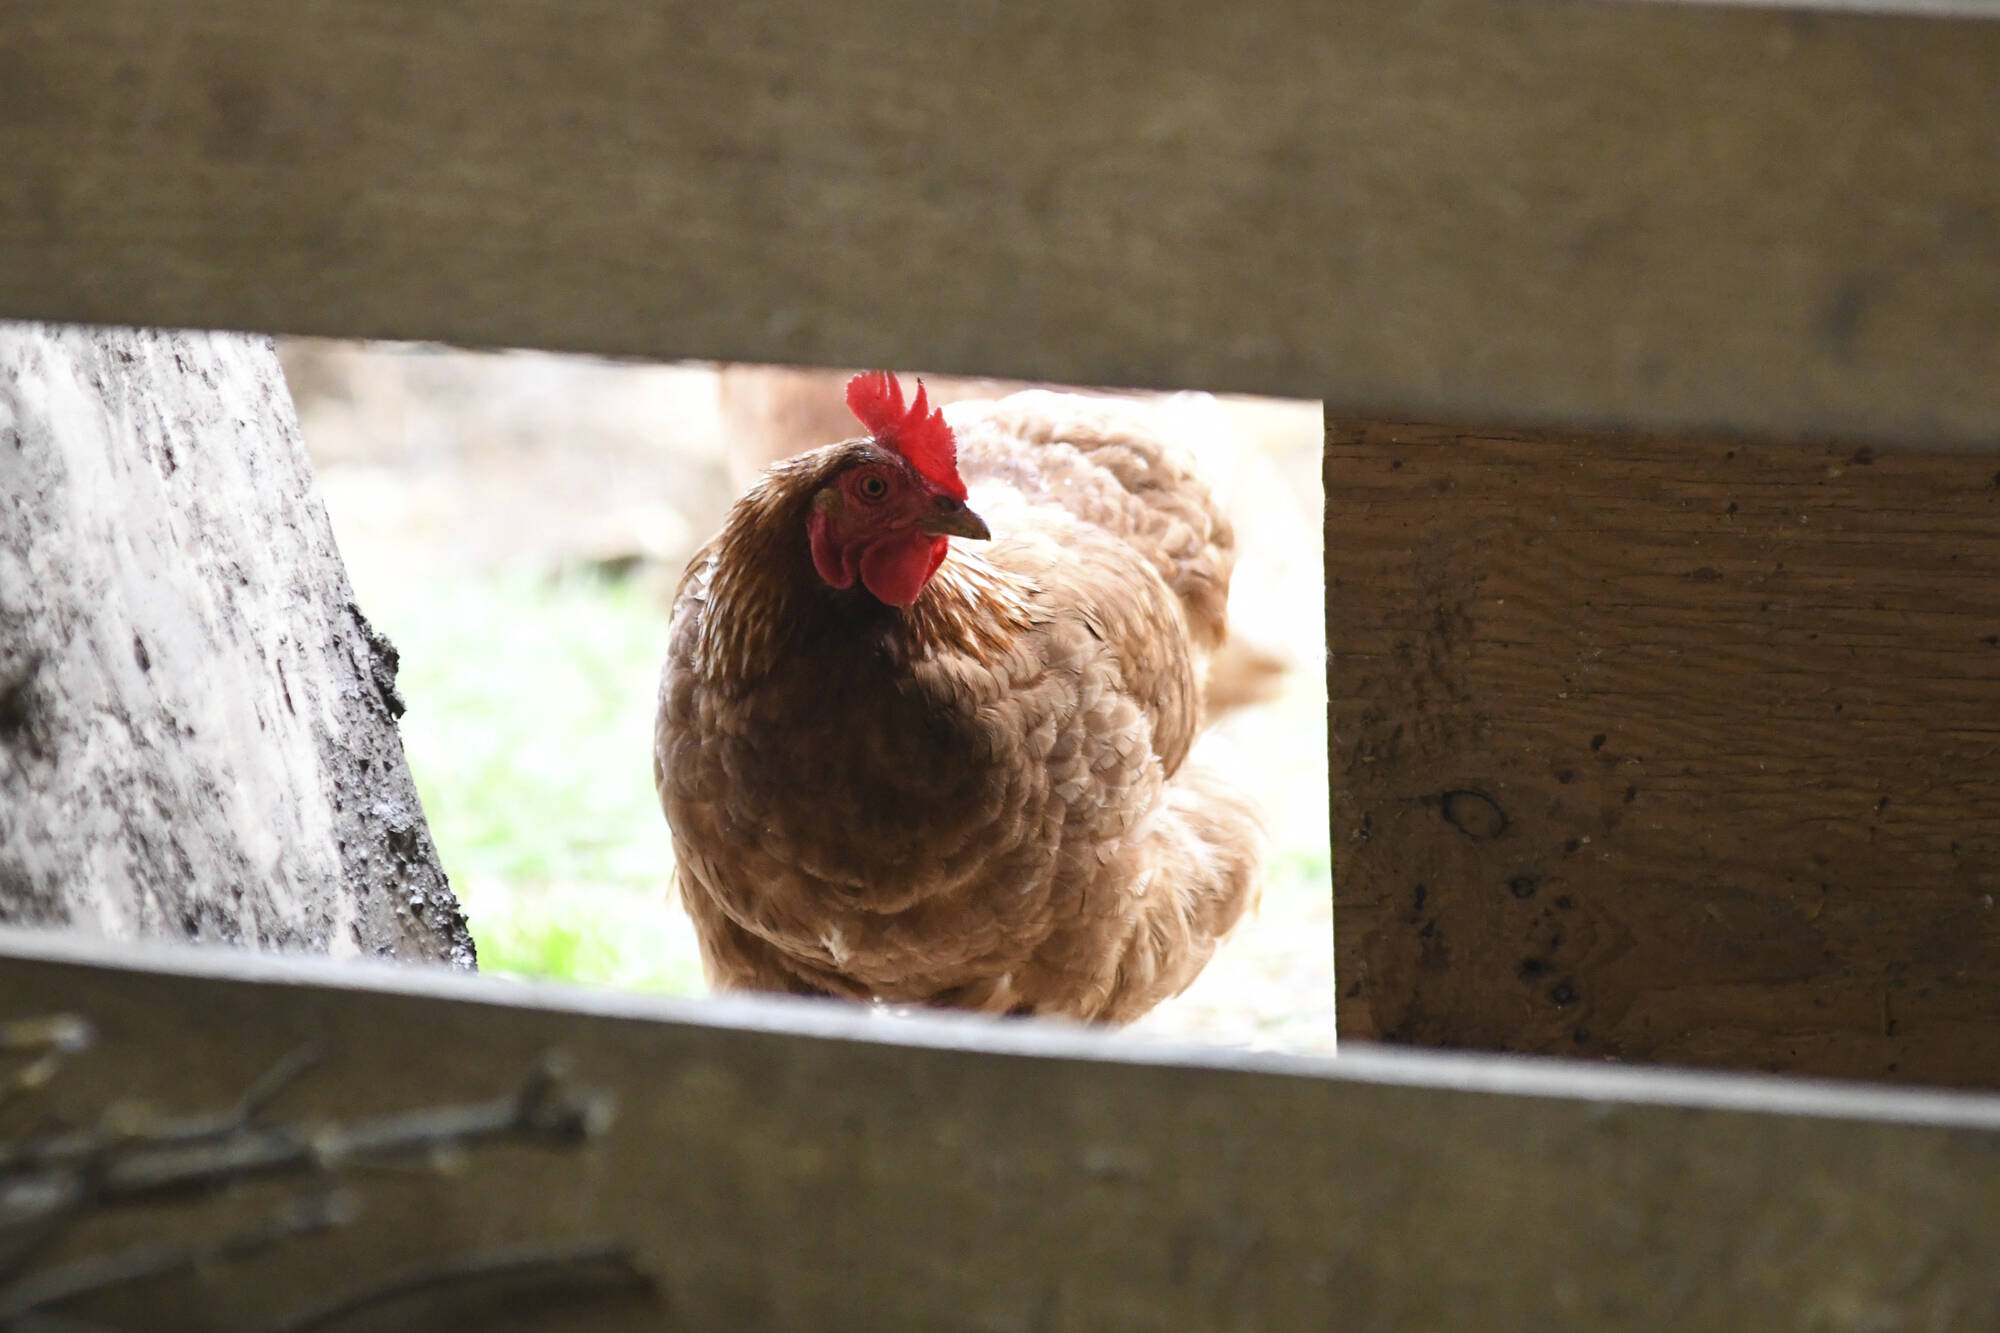 A chicken looks in the barn at Honey Brook Farm in Schuylkill Haven, Pa., on Monday, April 18, 2022. The state Department of Agriculture confirmed a case of avian influenza in Lancaster County on Saturday. (Lindsey Shuey/Republican-Herald via AP)